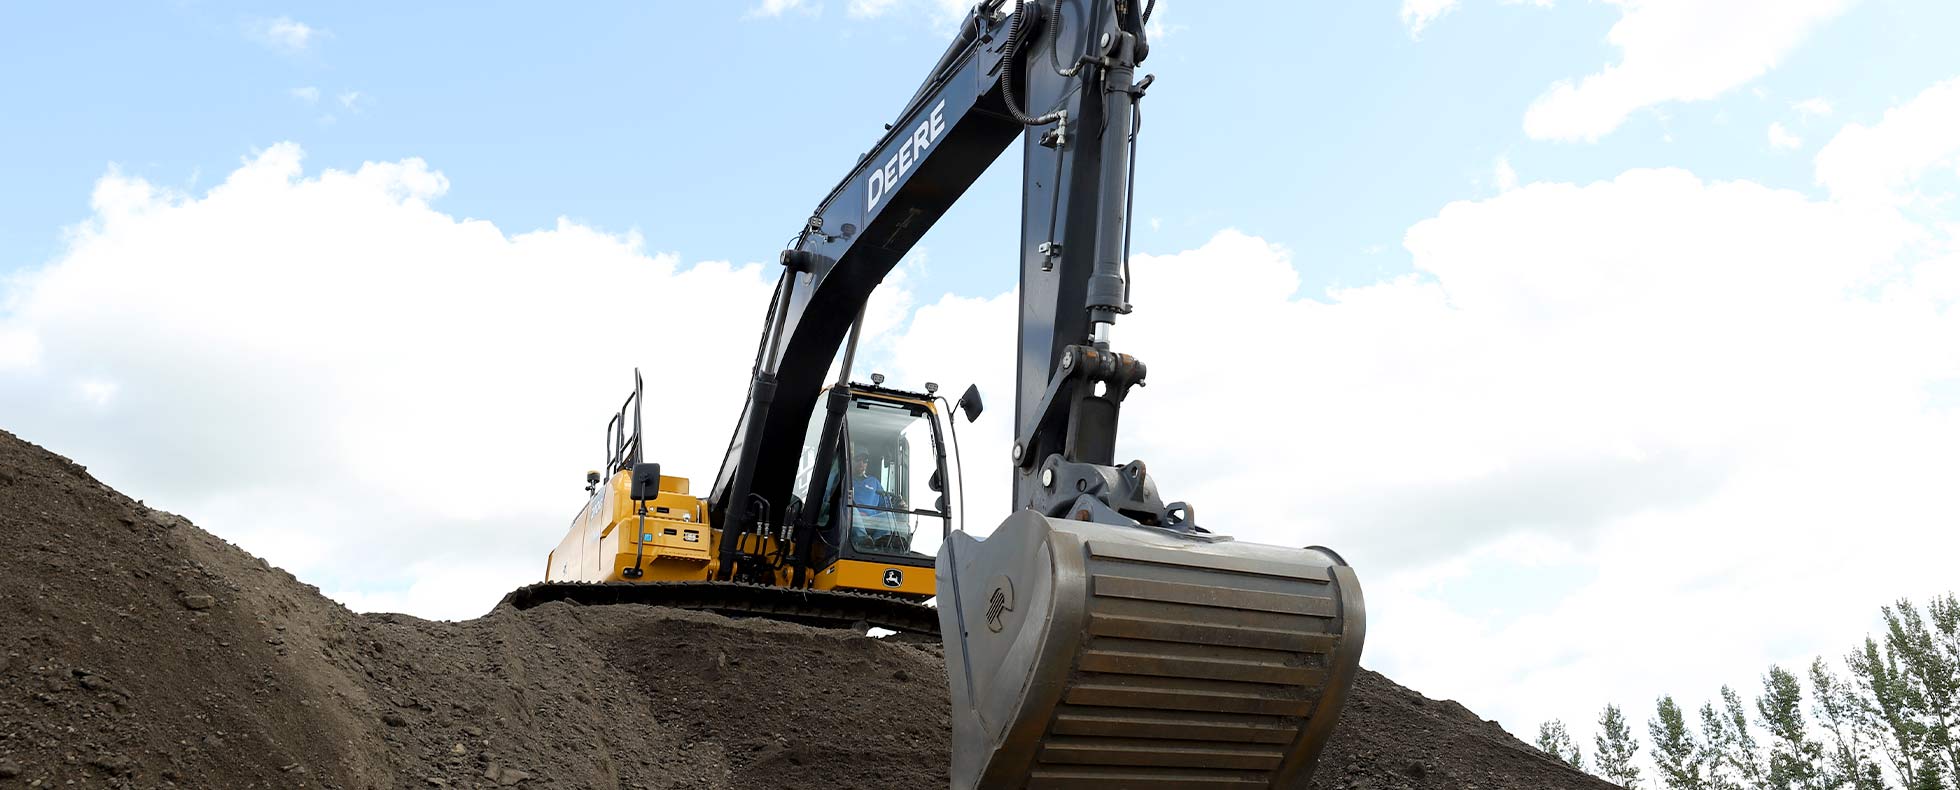 What is Automation for Excavators? These 5 FAQs Cover the Basics of Excavator Technology